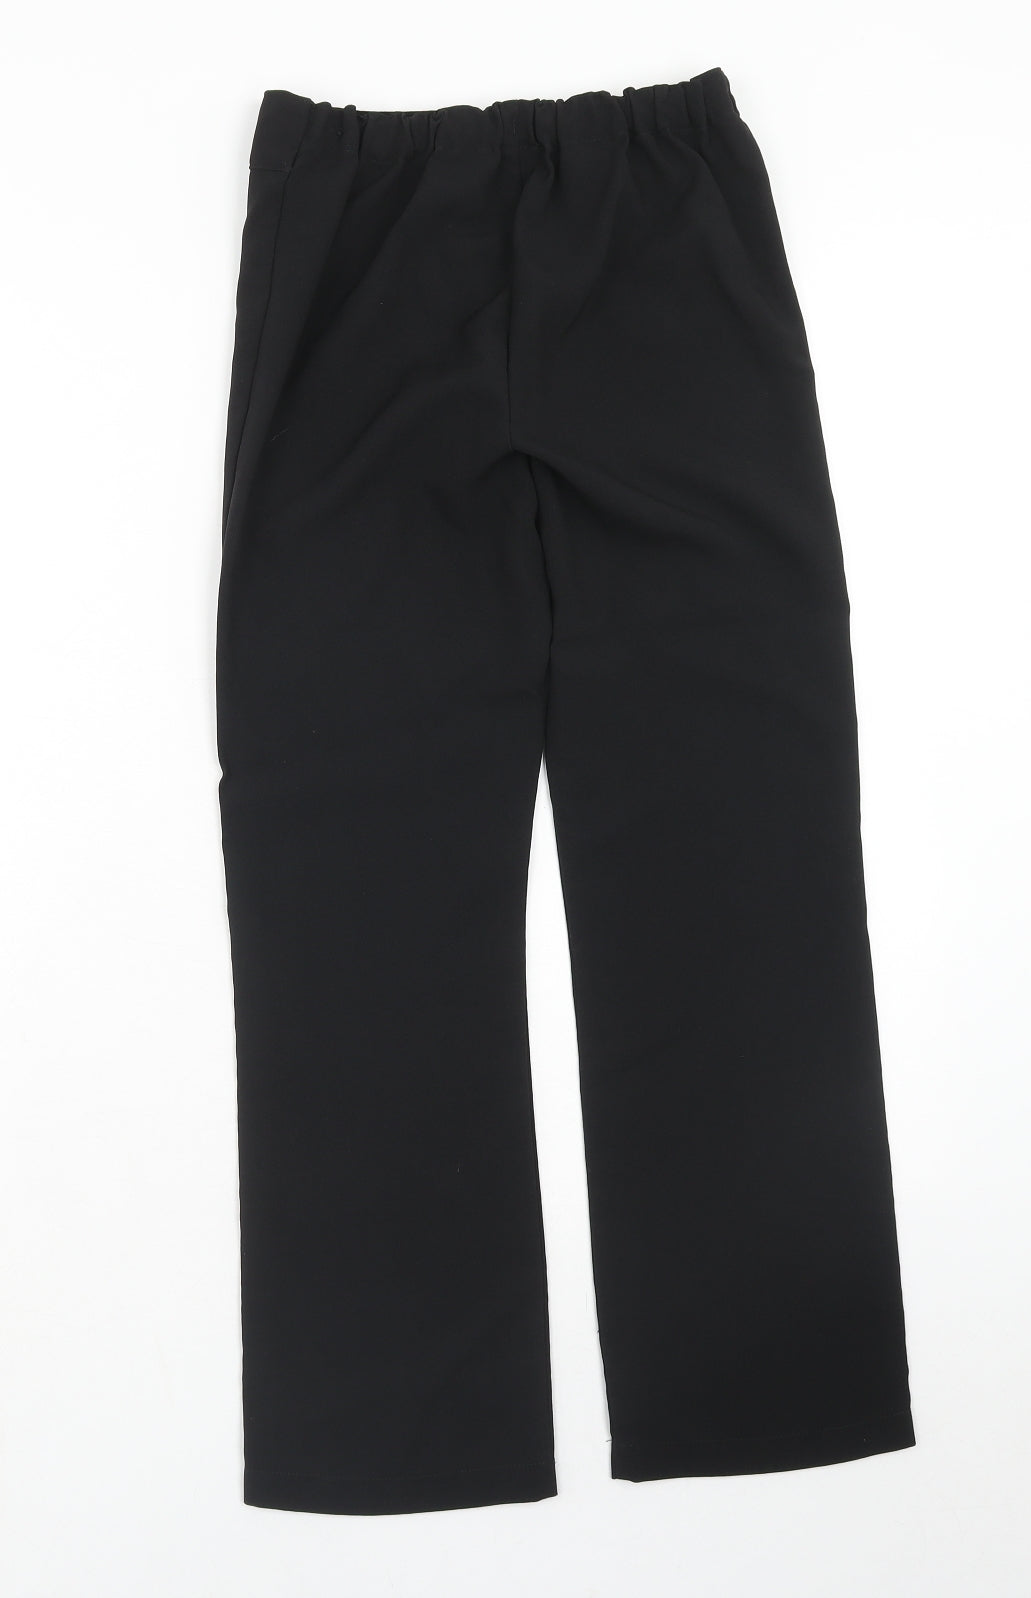 Matalan Boys Black Polyester Dress Pants Trousers Size 11 Years Regular Pullover